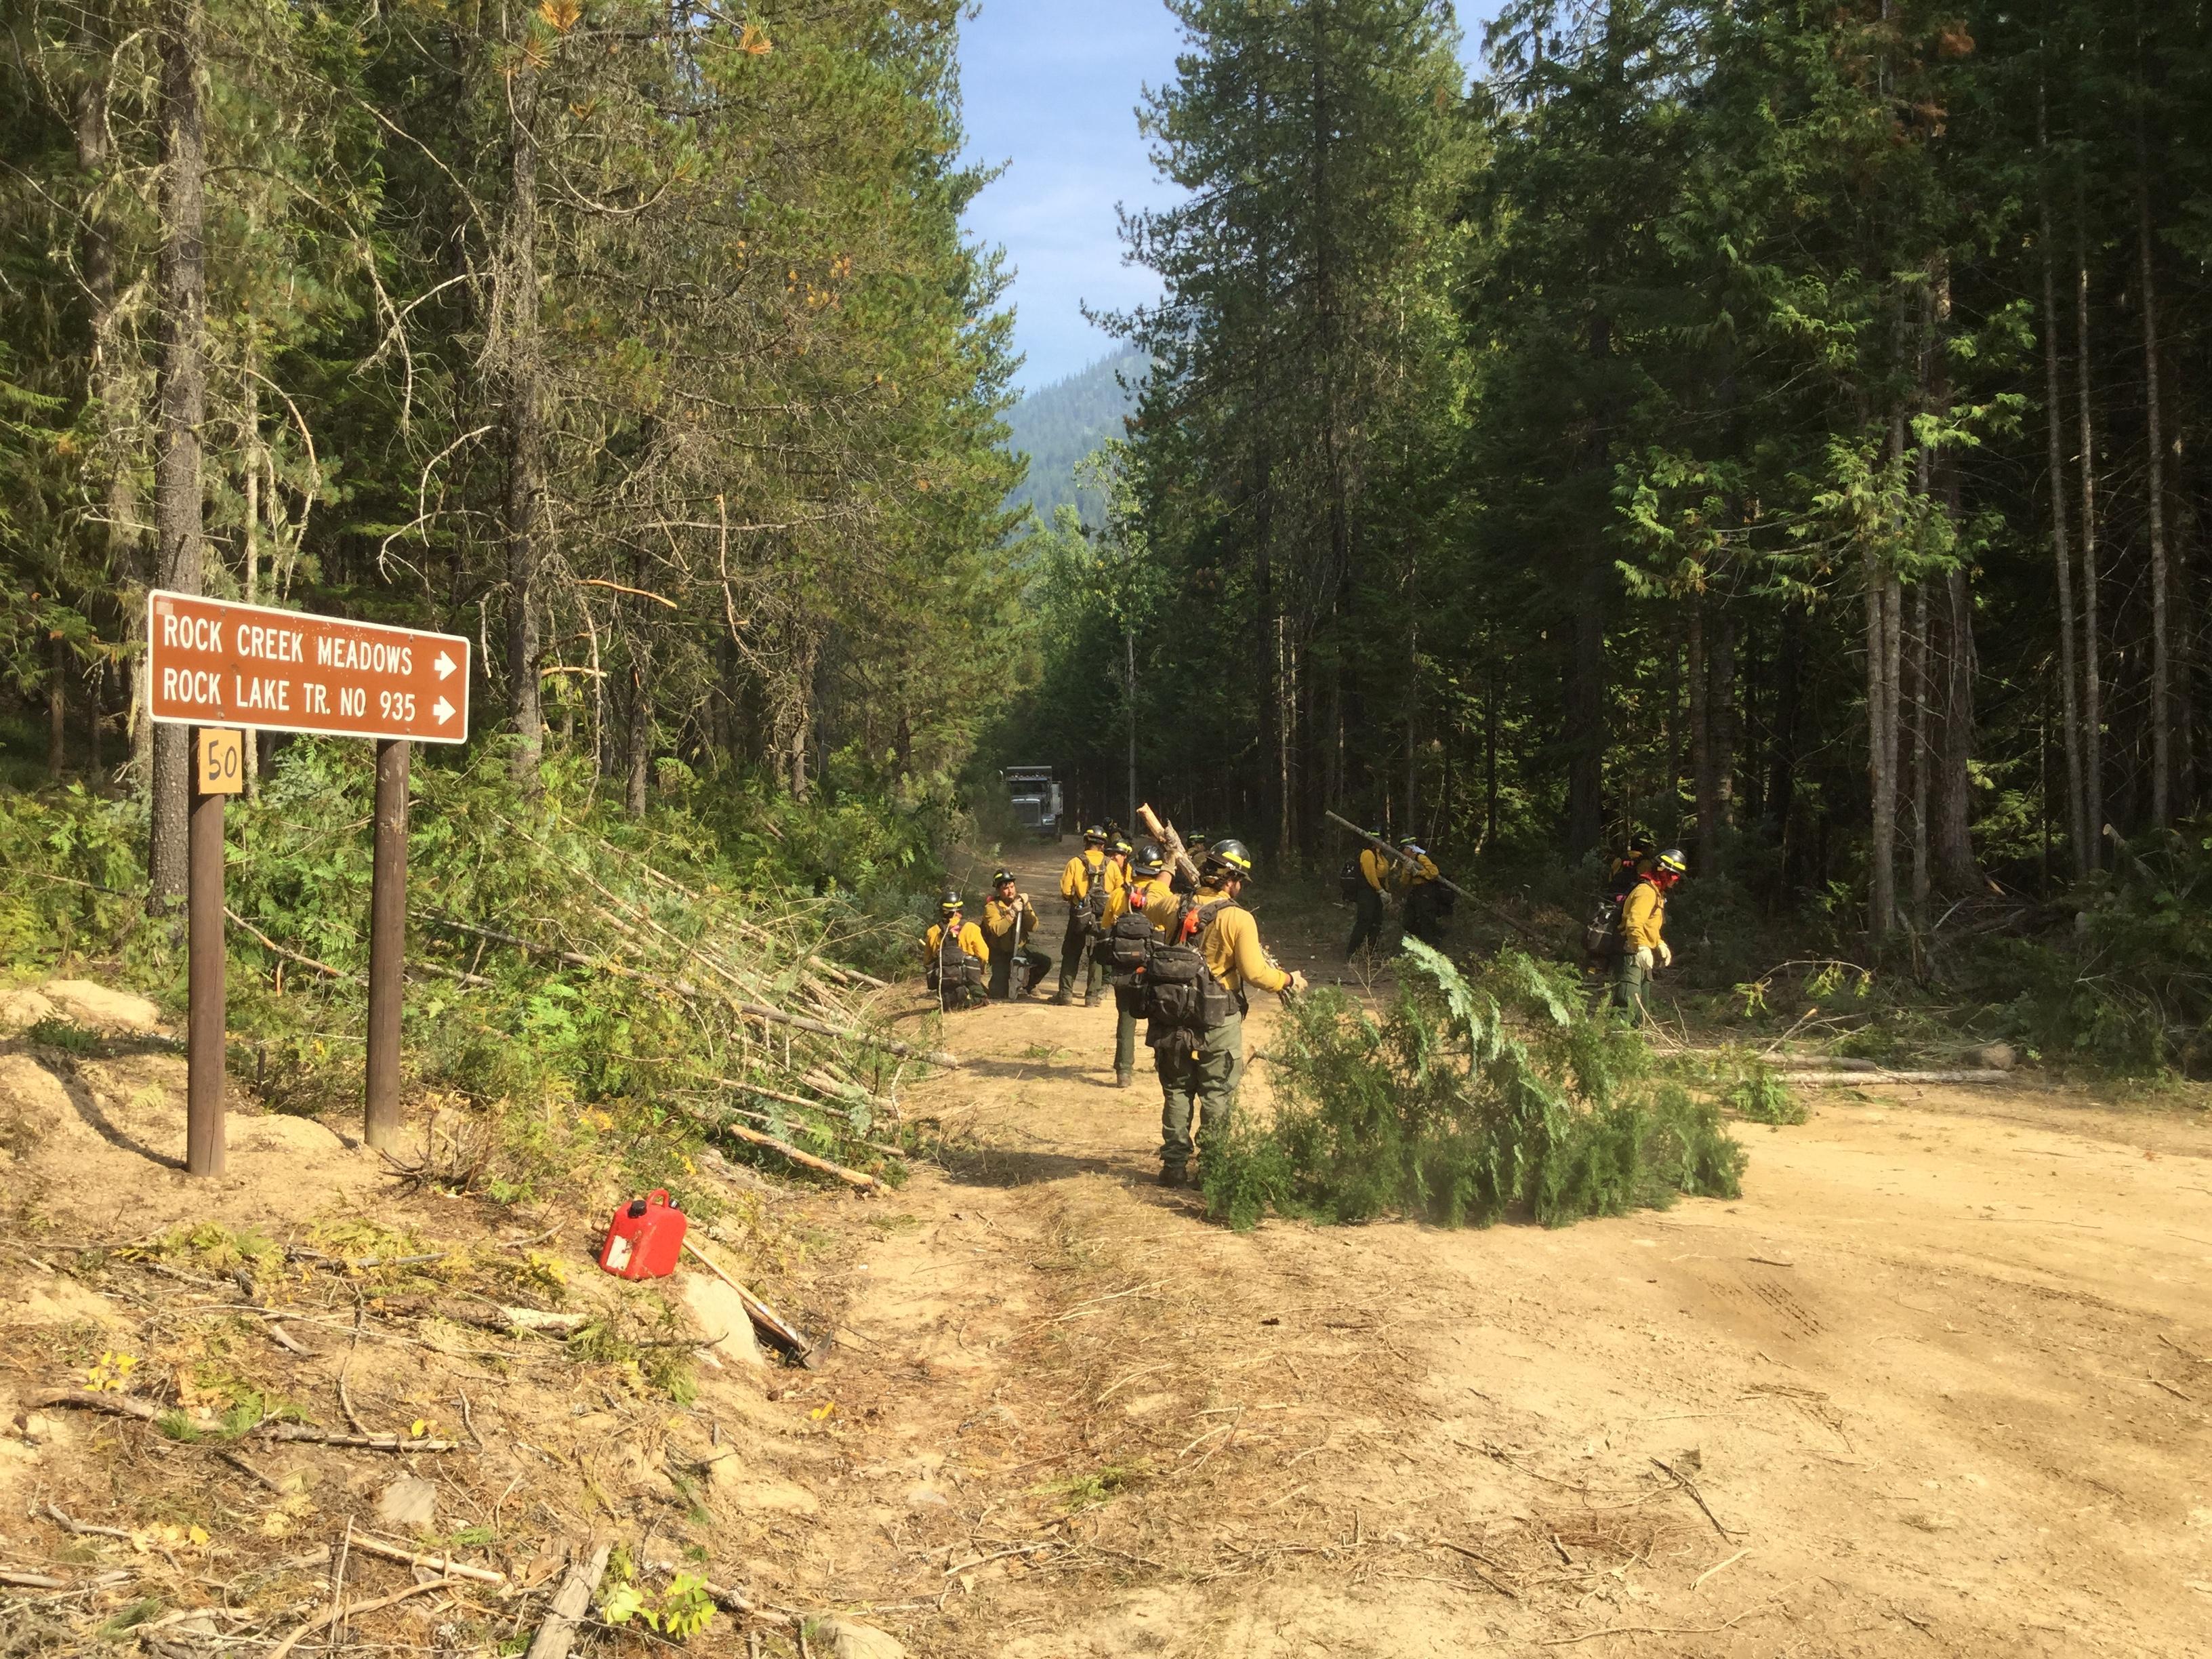 North Reforestation Crew Mitigating Fuels on the Government Fire 9.17.2022 Photo: B. Giersdorf, Fire Behavior, NR Team 7